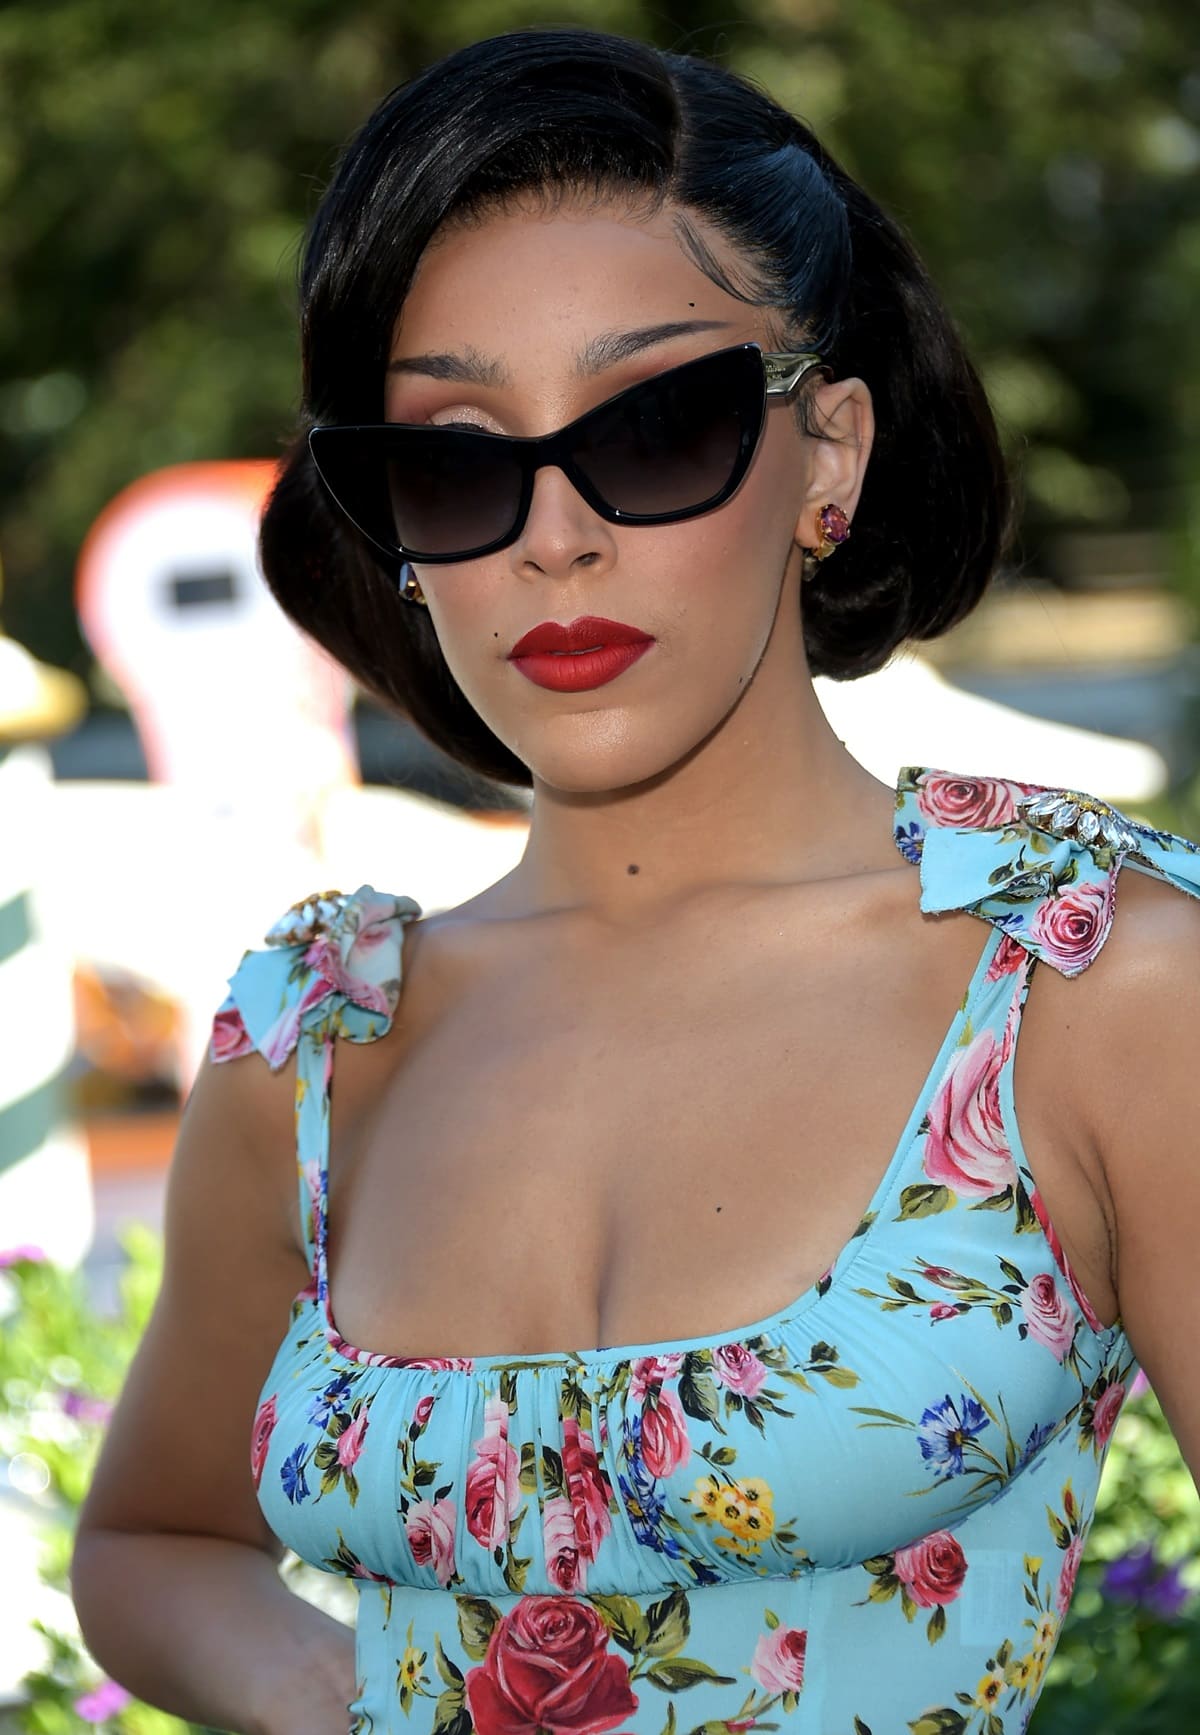 Doja Cat displays her boobs in a beautiful floral midi dress, complemented by cat-eye sunglasses during a Dolce & Gabbana event